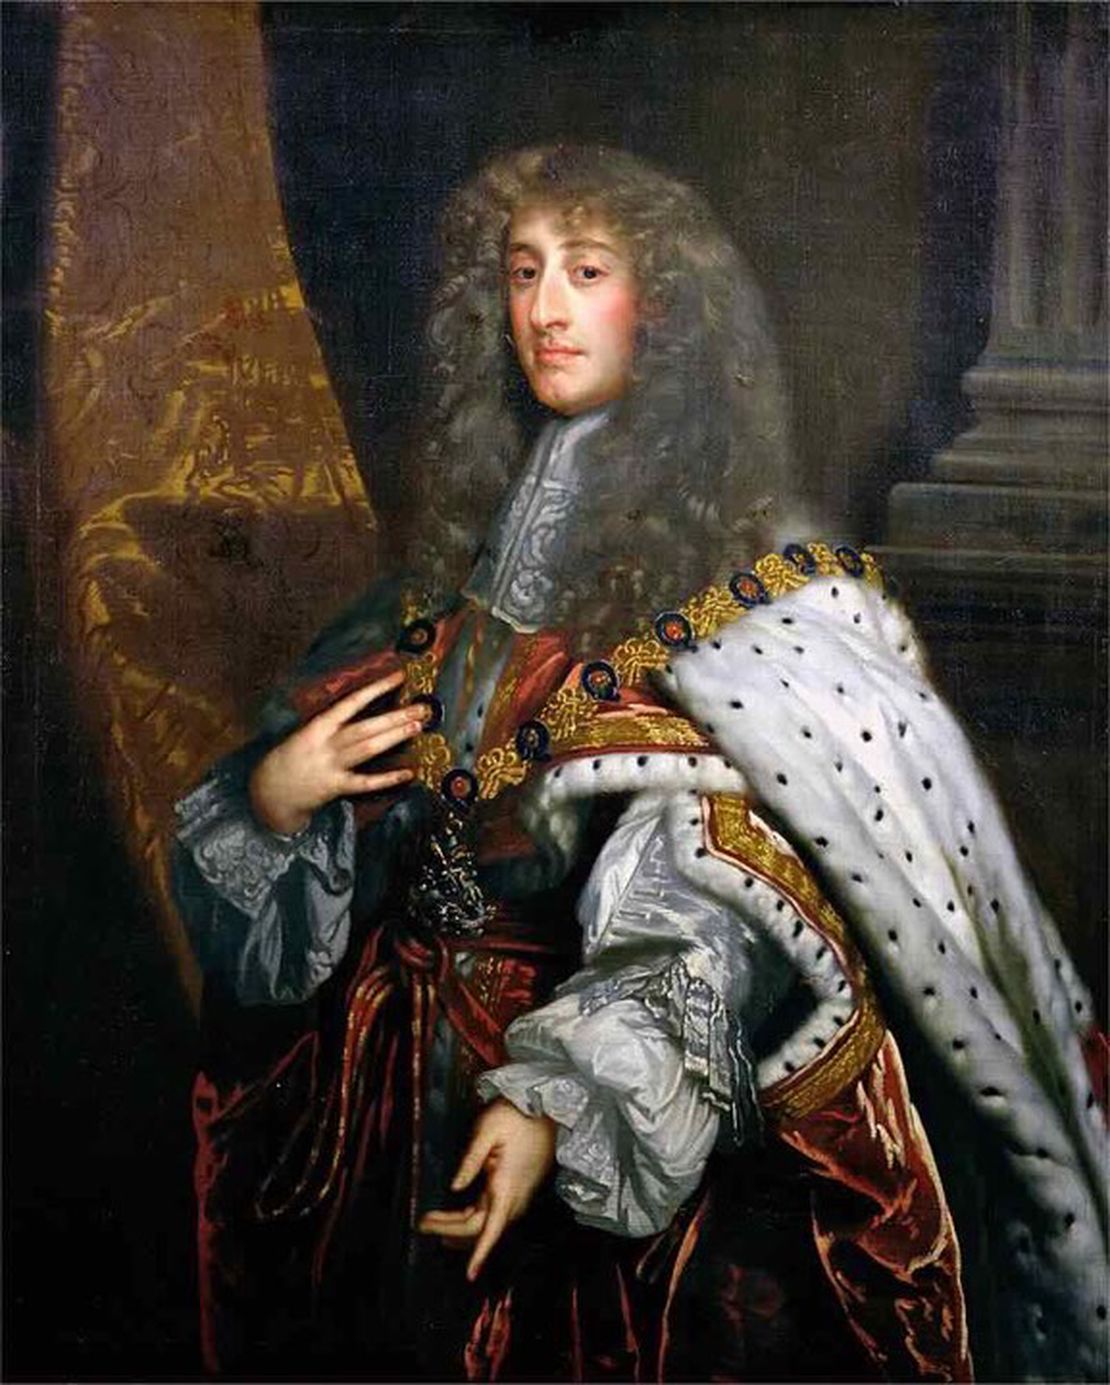 With the return of a Catholic monarchy James II payments to the Catholic hierarchy are authorized